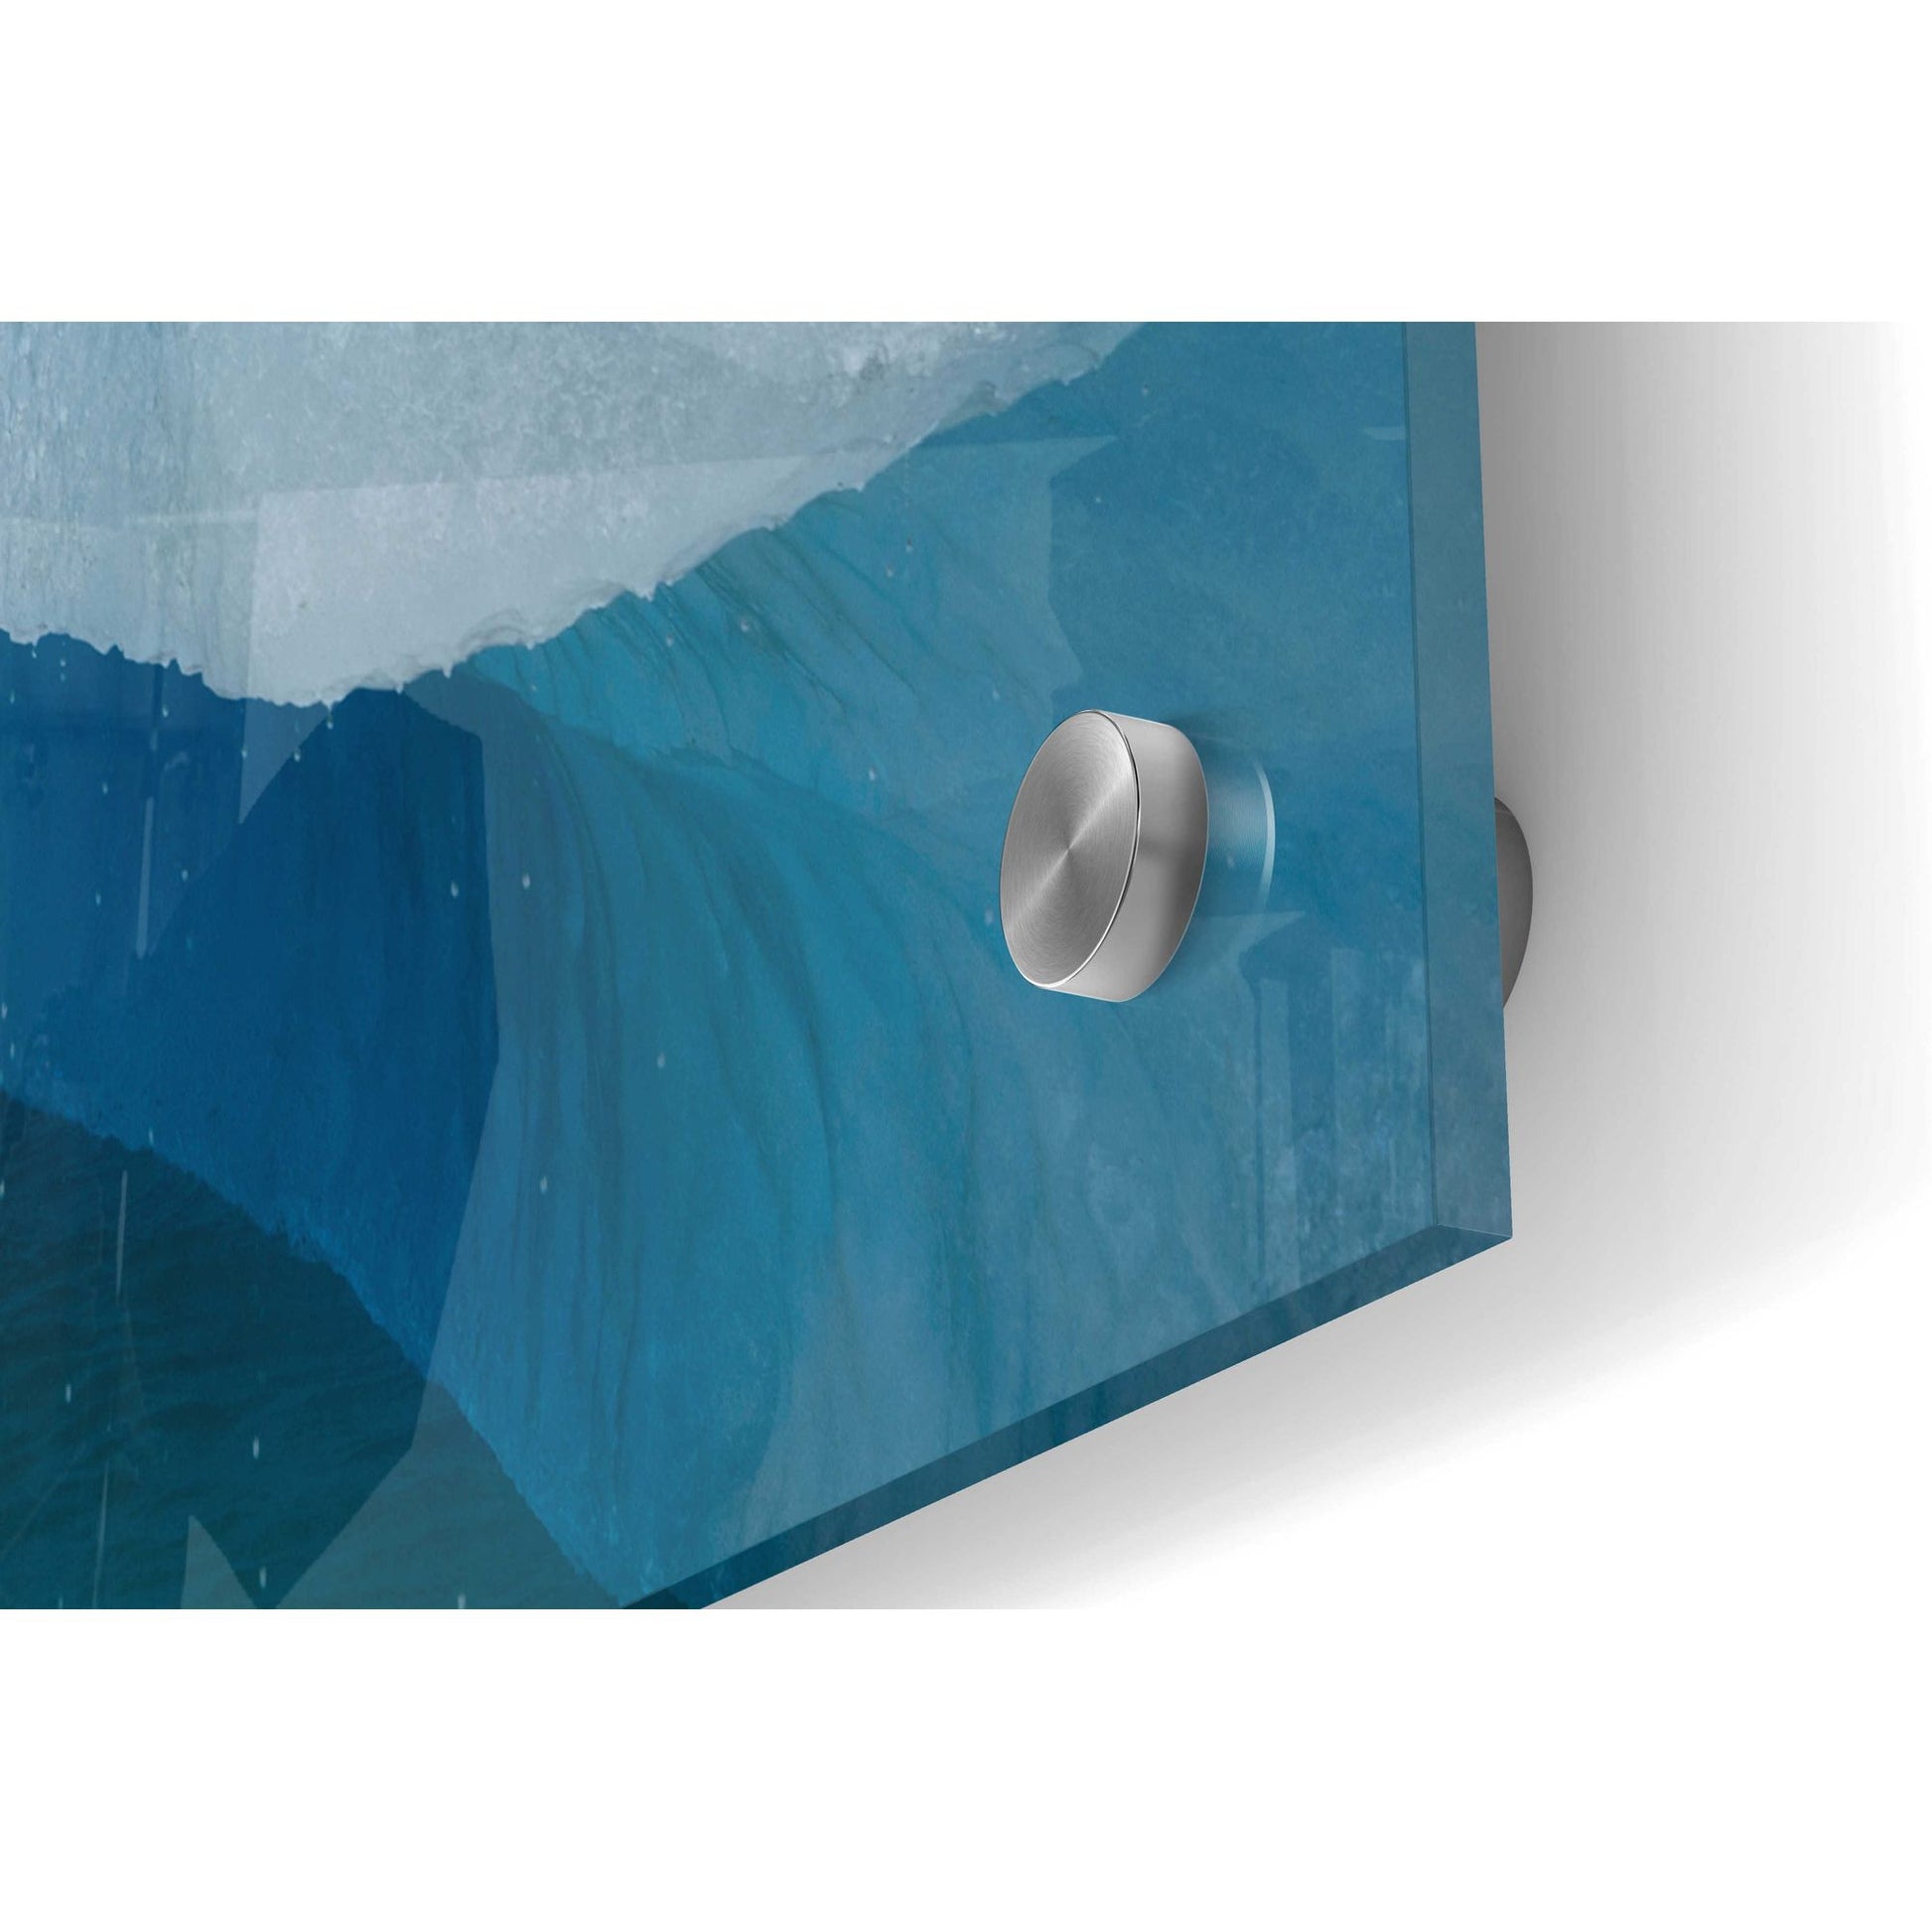 Epic Art 'Glacial' by Dennis Frates, Acrylic Glass Wall Art,36x24